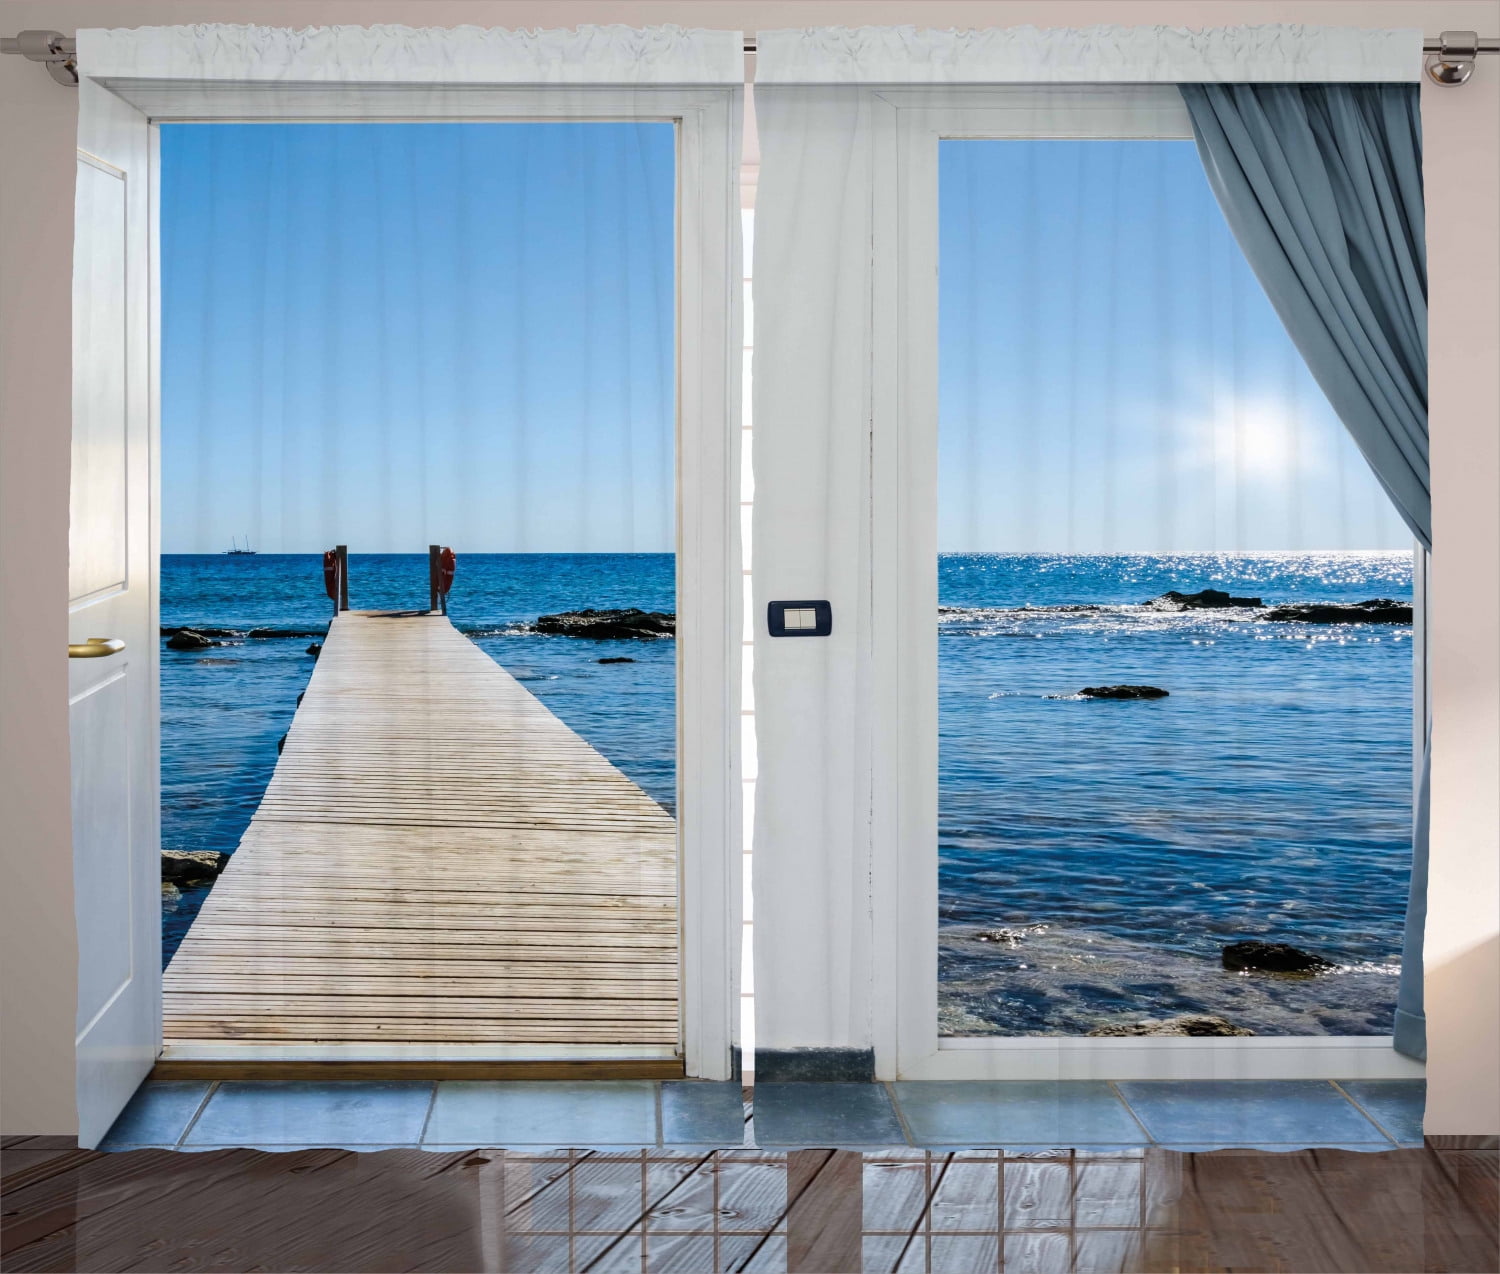 Ambesonne Ocean Curtains Aqua Blue and Ivory Solitude Peaceful Beach Scene Sea and Cloudy Sky Paradise View Print Living Room Bedroom Window Drapes 2 Panel Set 108 X 90